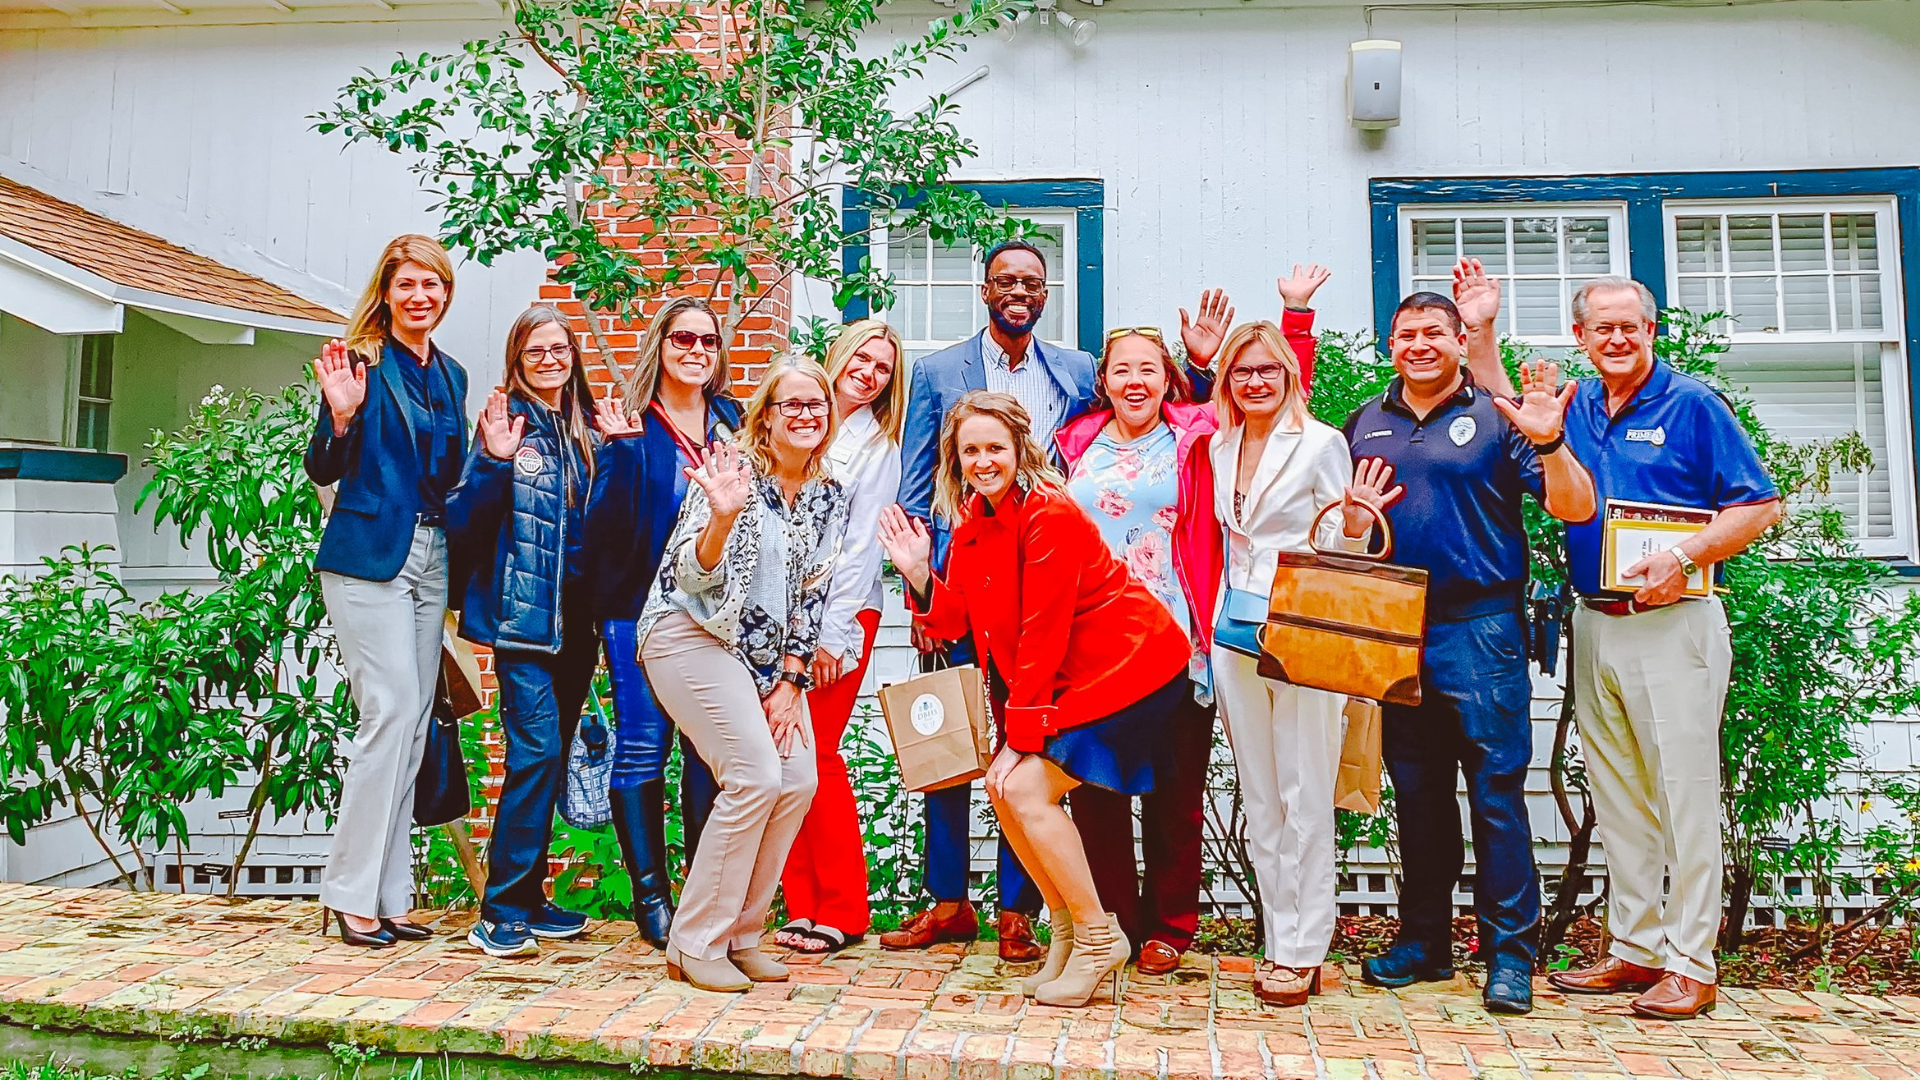 “I’m so glad I decided to participate in Leadership Delray! It was a fantastic way to make connections with people and businesses all over Delray. The Chamber did a fantastic job keeping our class together and converting to virtual events during COVID-19, and I have made some lasting friendships through this experience.” - Keely Sanders, Hyatt Place Delray Beach